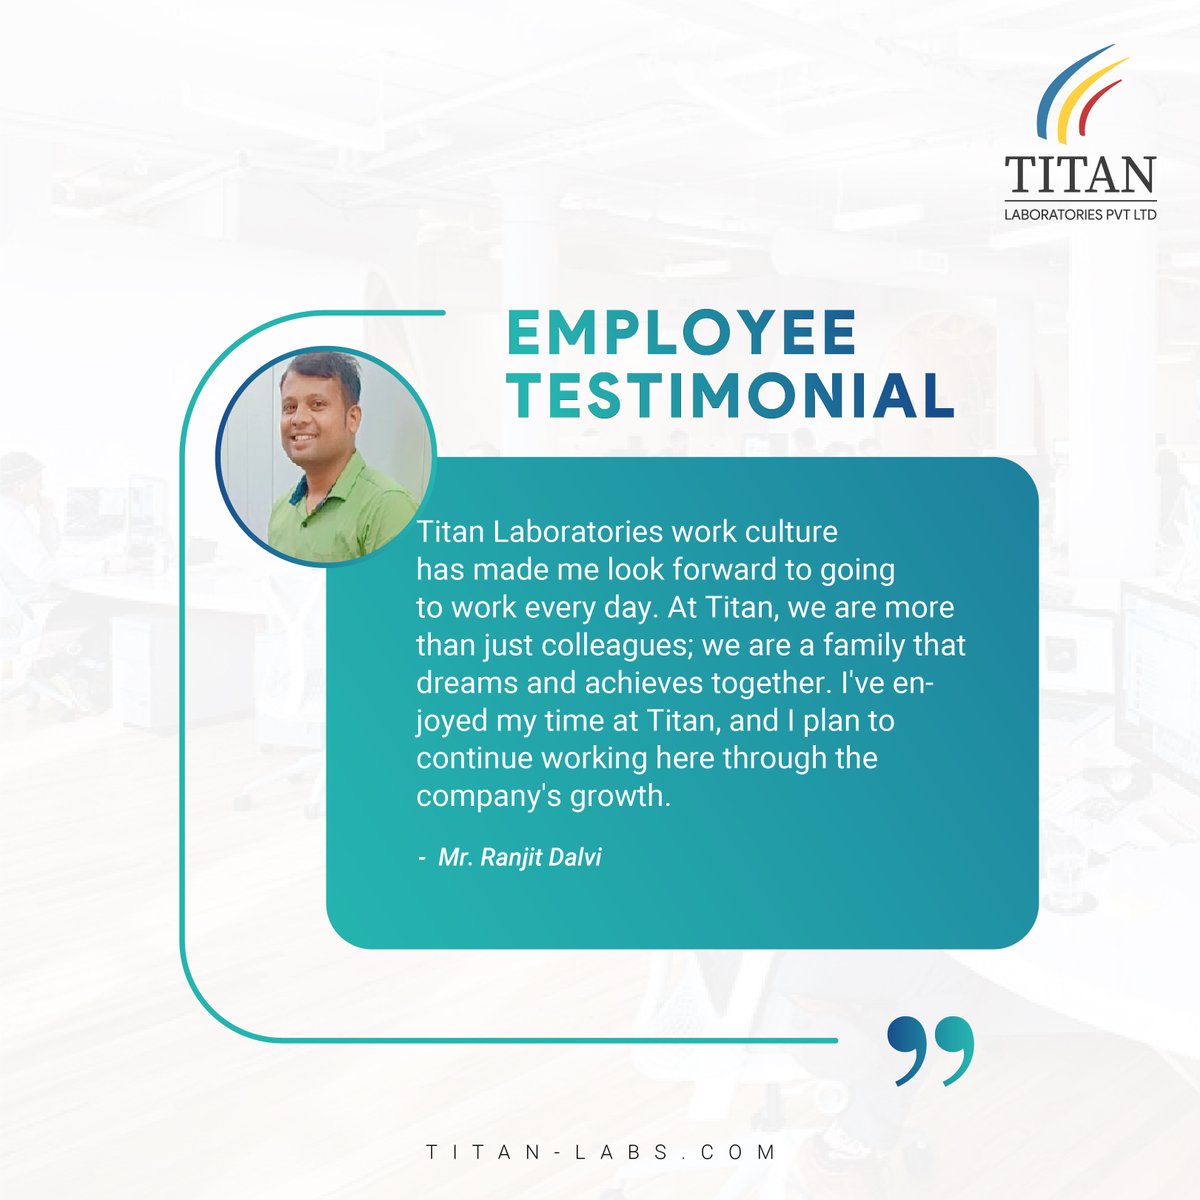 We are thrilled to share an outstanding review from one of our dedicated team members at Titan Laboratories! 

#employeereview #review #employee #employeeengagement #feedback #employeeexperience #titan #titanlaboratories #titanlaboratoriespvtltd